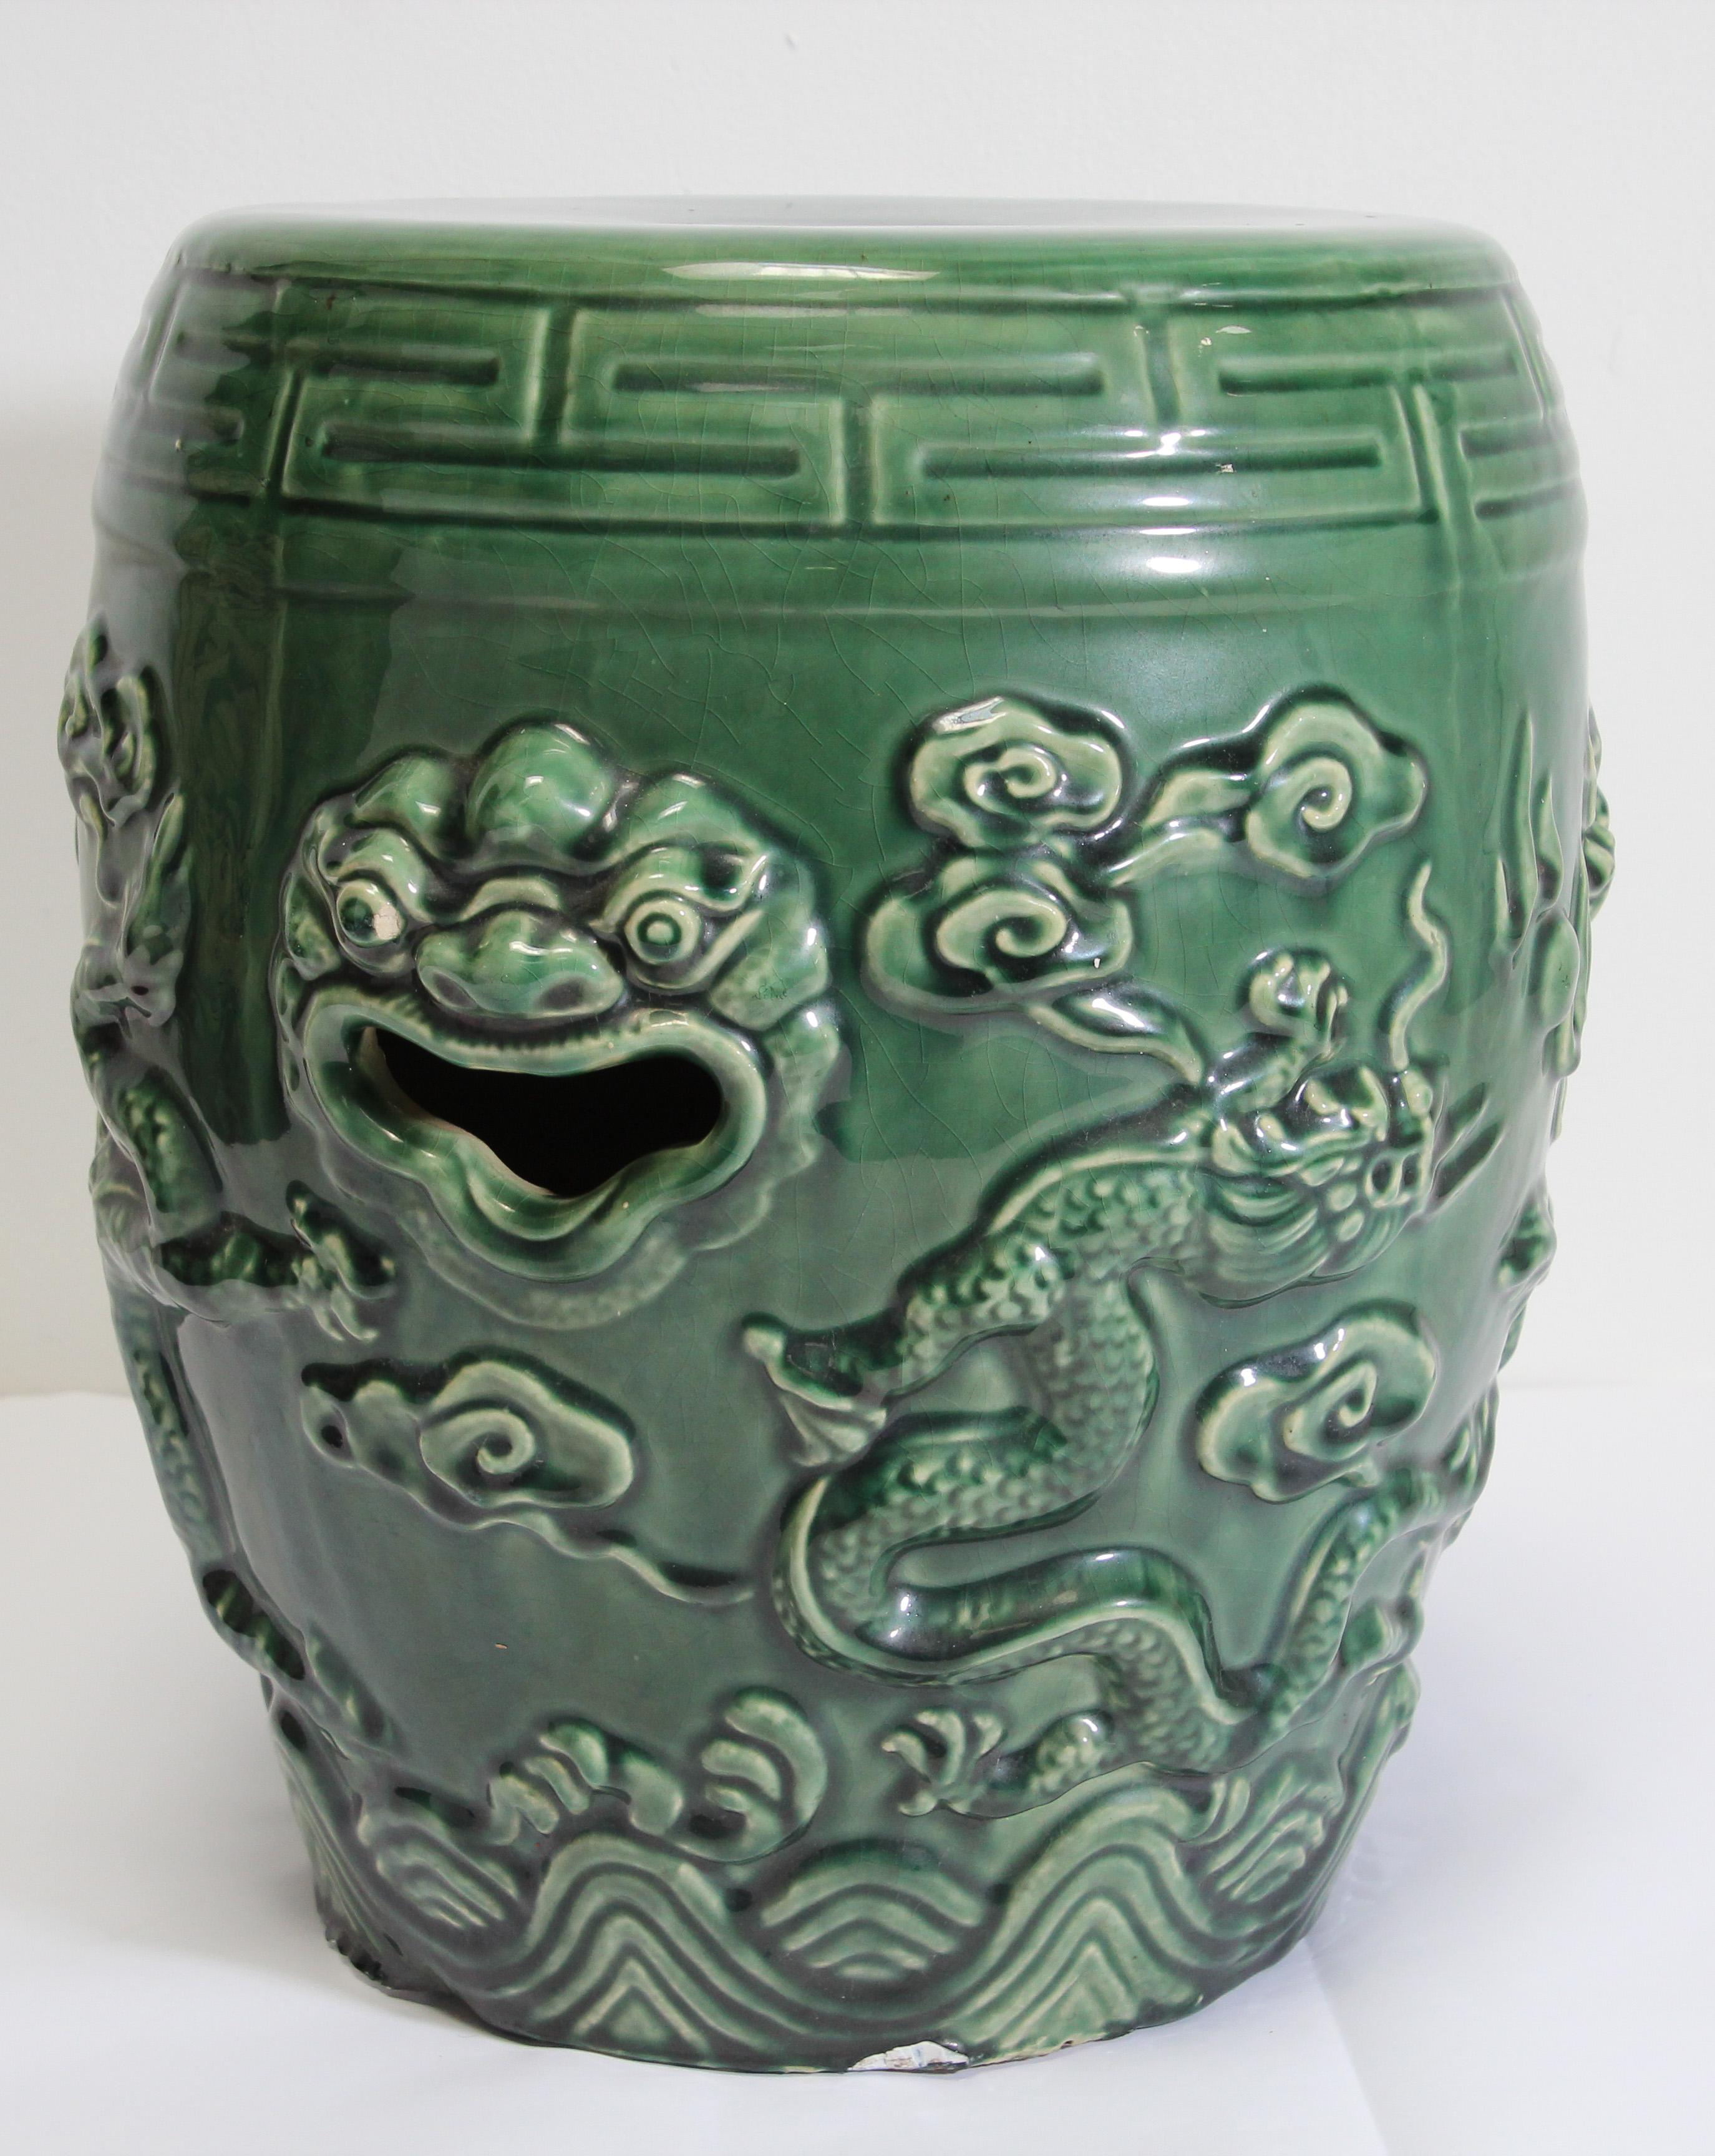 Hand-Crafted Emerald Green Chinese Ceramic Garden Stool with Dragons